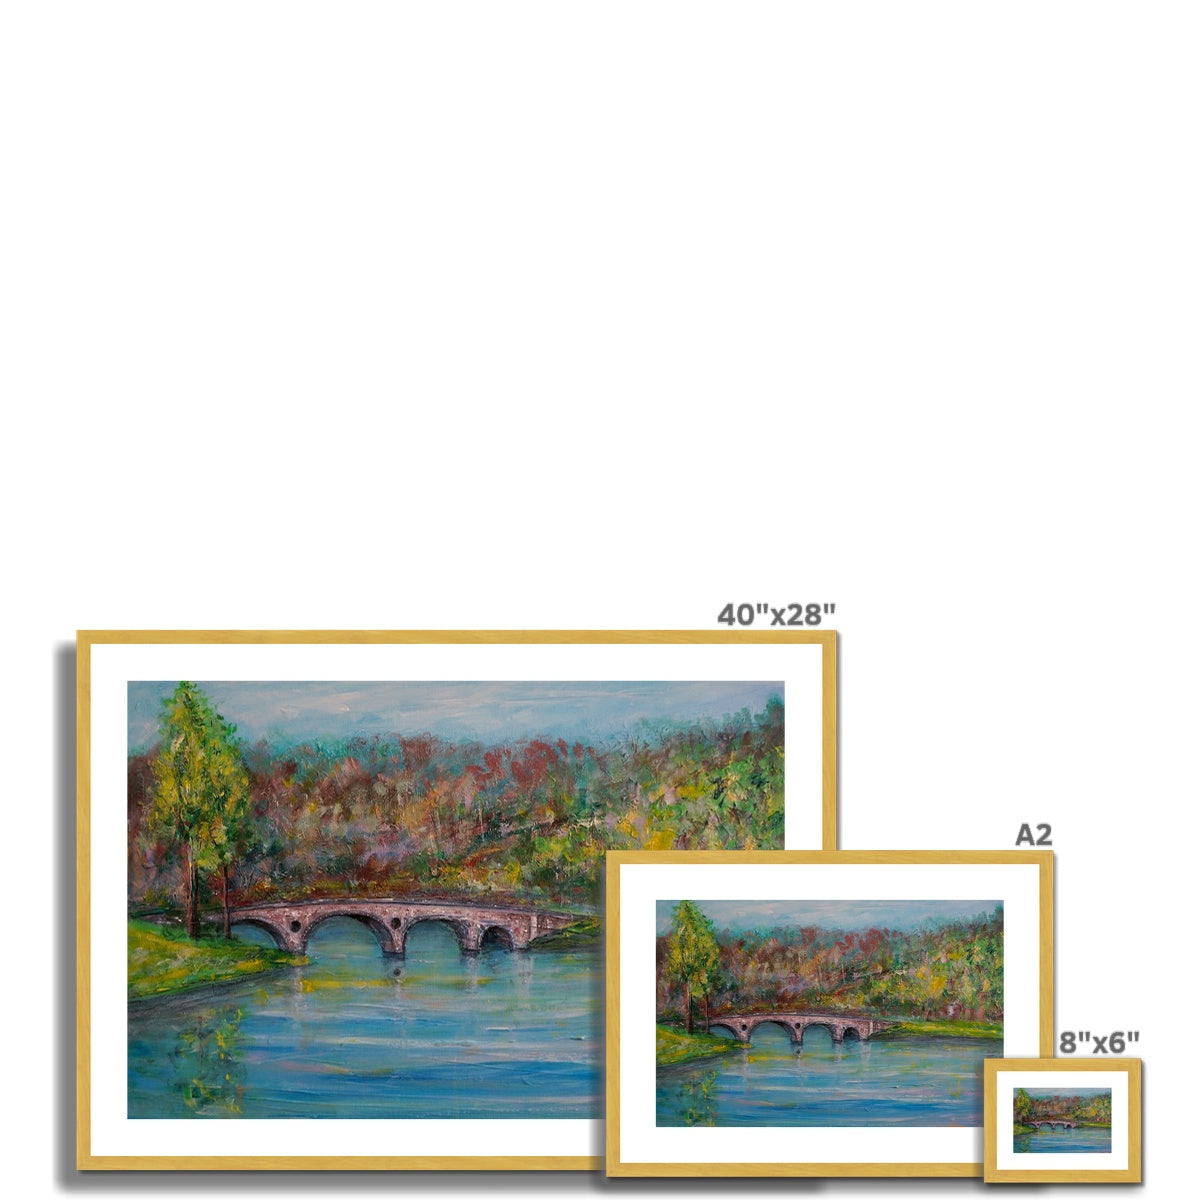 Kenmore Bridge Painting | Antique Framed & Mounted Prints From Scotland-Antique Framed & Mounted Prints-Scottish Highlands & Lowlands Art Gallery-Paintings, Prints, Homeware, Art Gifts From Scotland By Scottish Artist Kevin Hunter